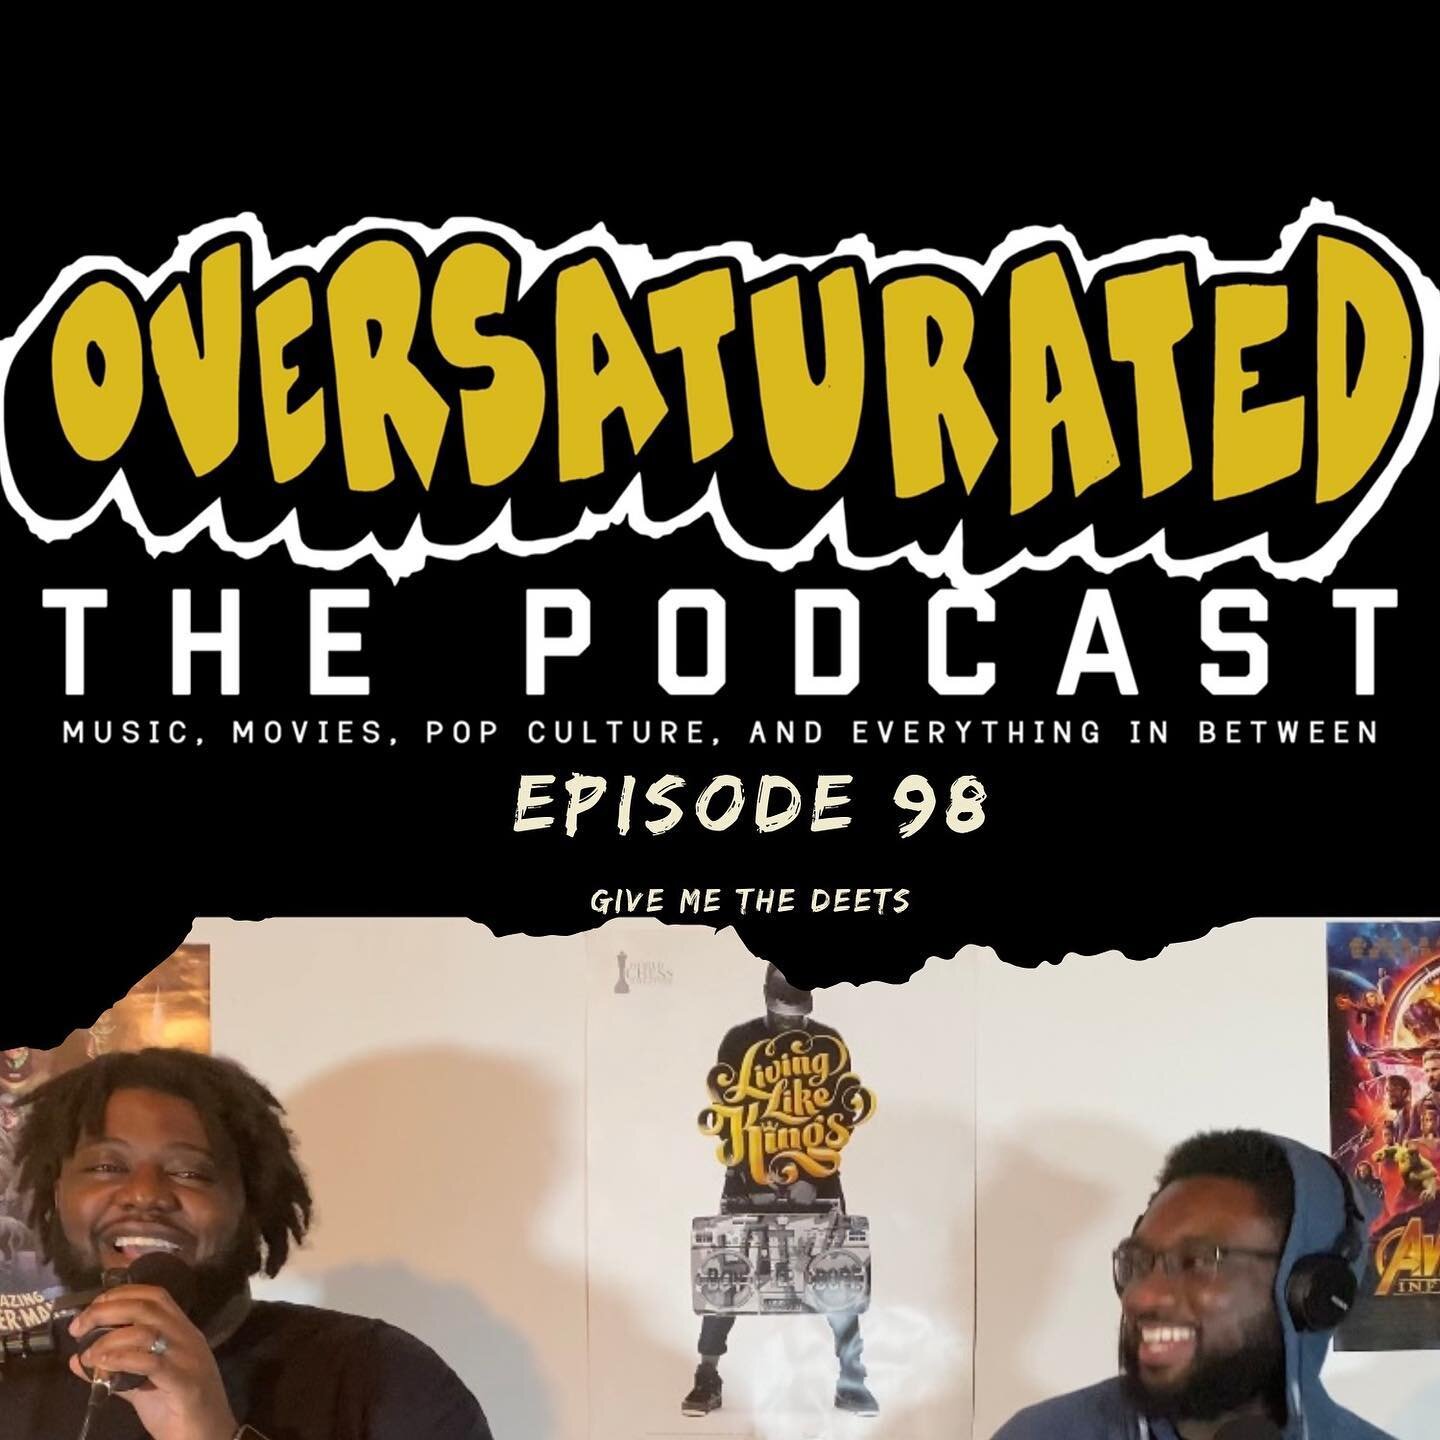 Episode 98 - Give Me The Deets

Episode 98 of @oversatthepodcast - Give Me The Deets

Look out for #OFFTheDome
-Reactions to Bruno Mars x Anderson Paak&rsquo;s New Song
-Drake&rsquo;s New EP
-Square purchased Tidal
-Nas doesn&rsquo;t feel any pressur